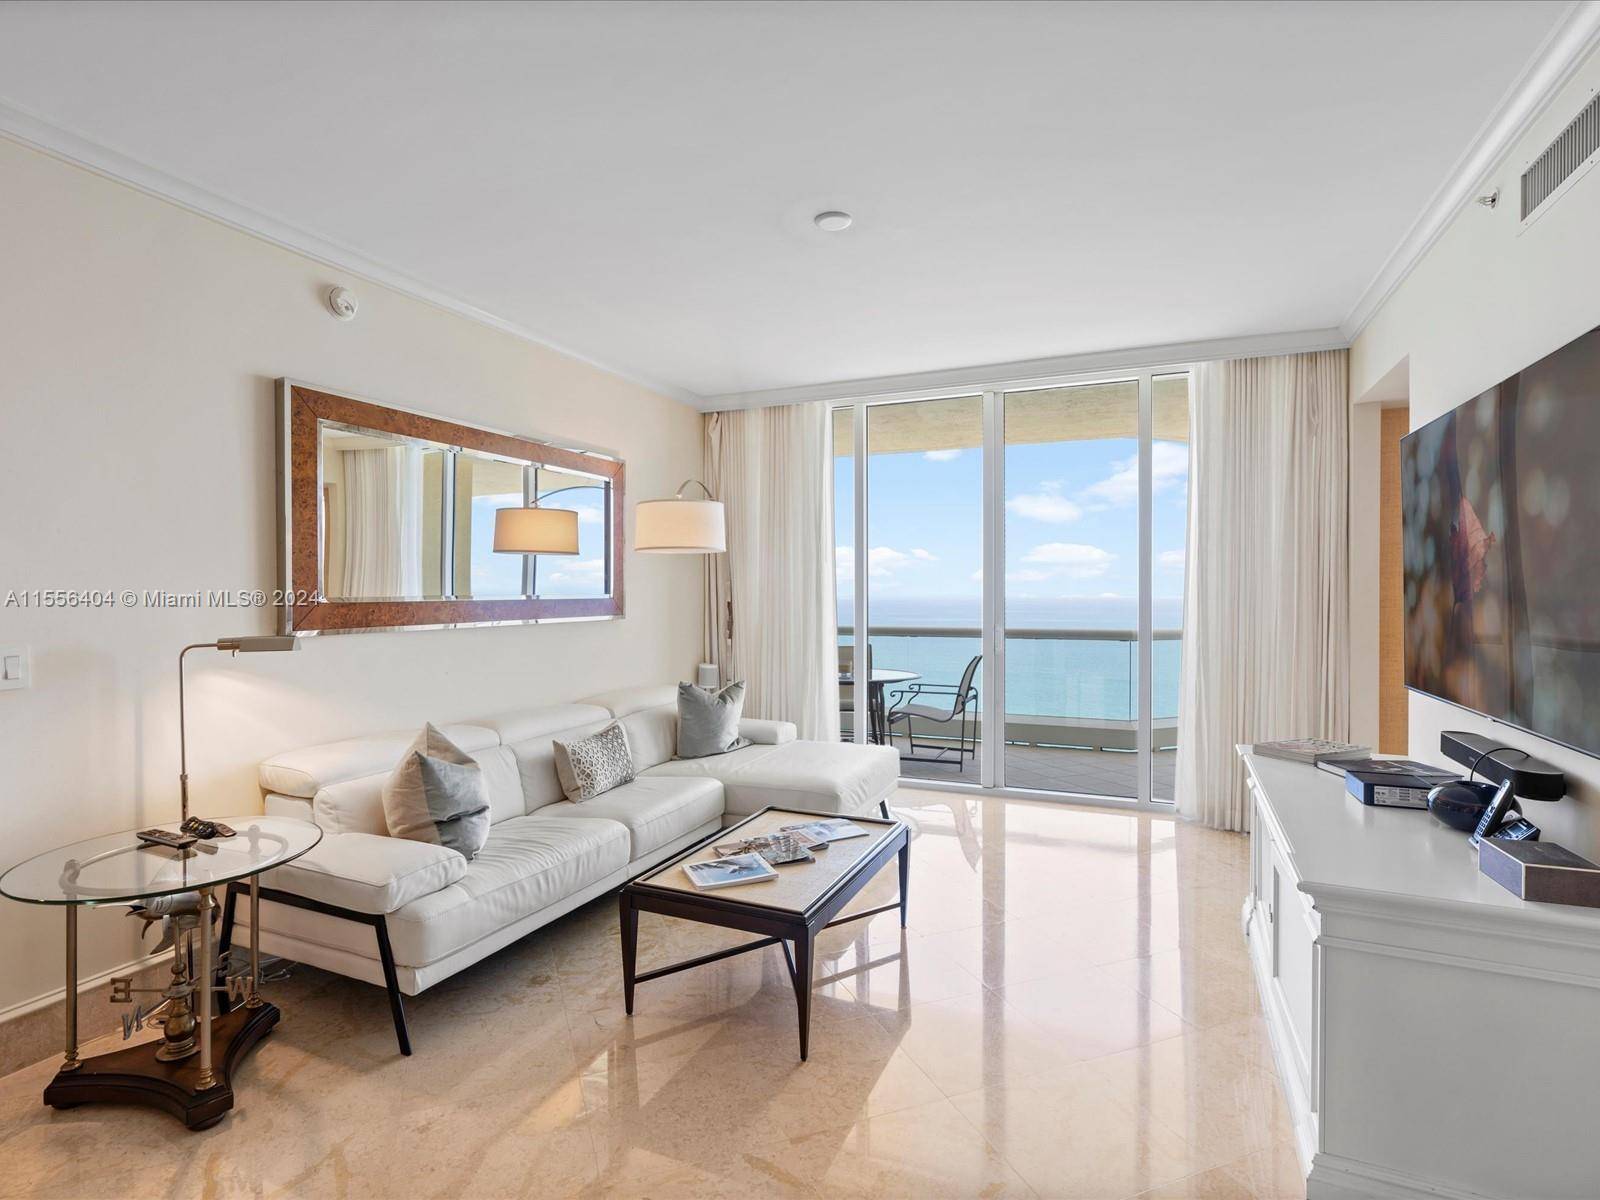 Experience luxury living at its finest in this stunning 3 bedroom, 3 bathroom unit located at the prestigious Acqualina Resort and Residences.